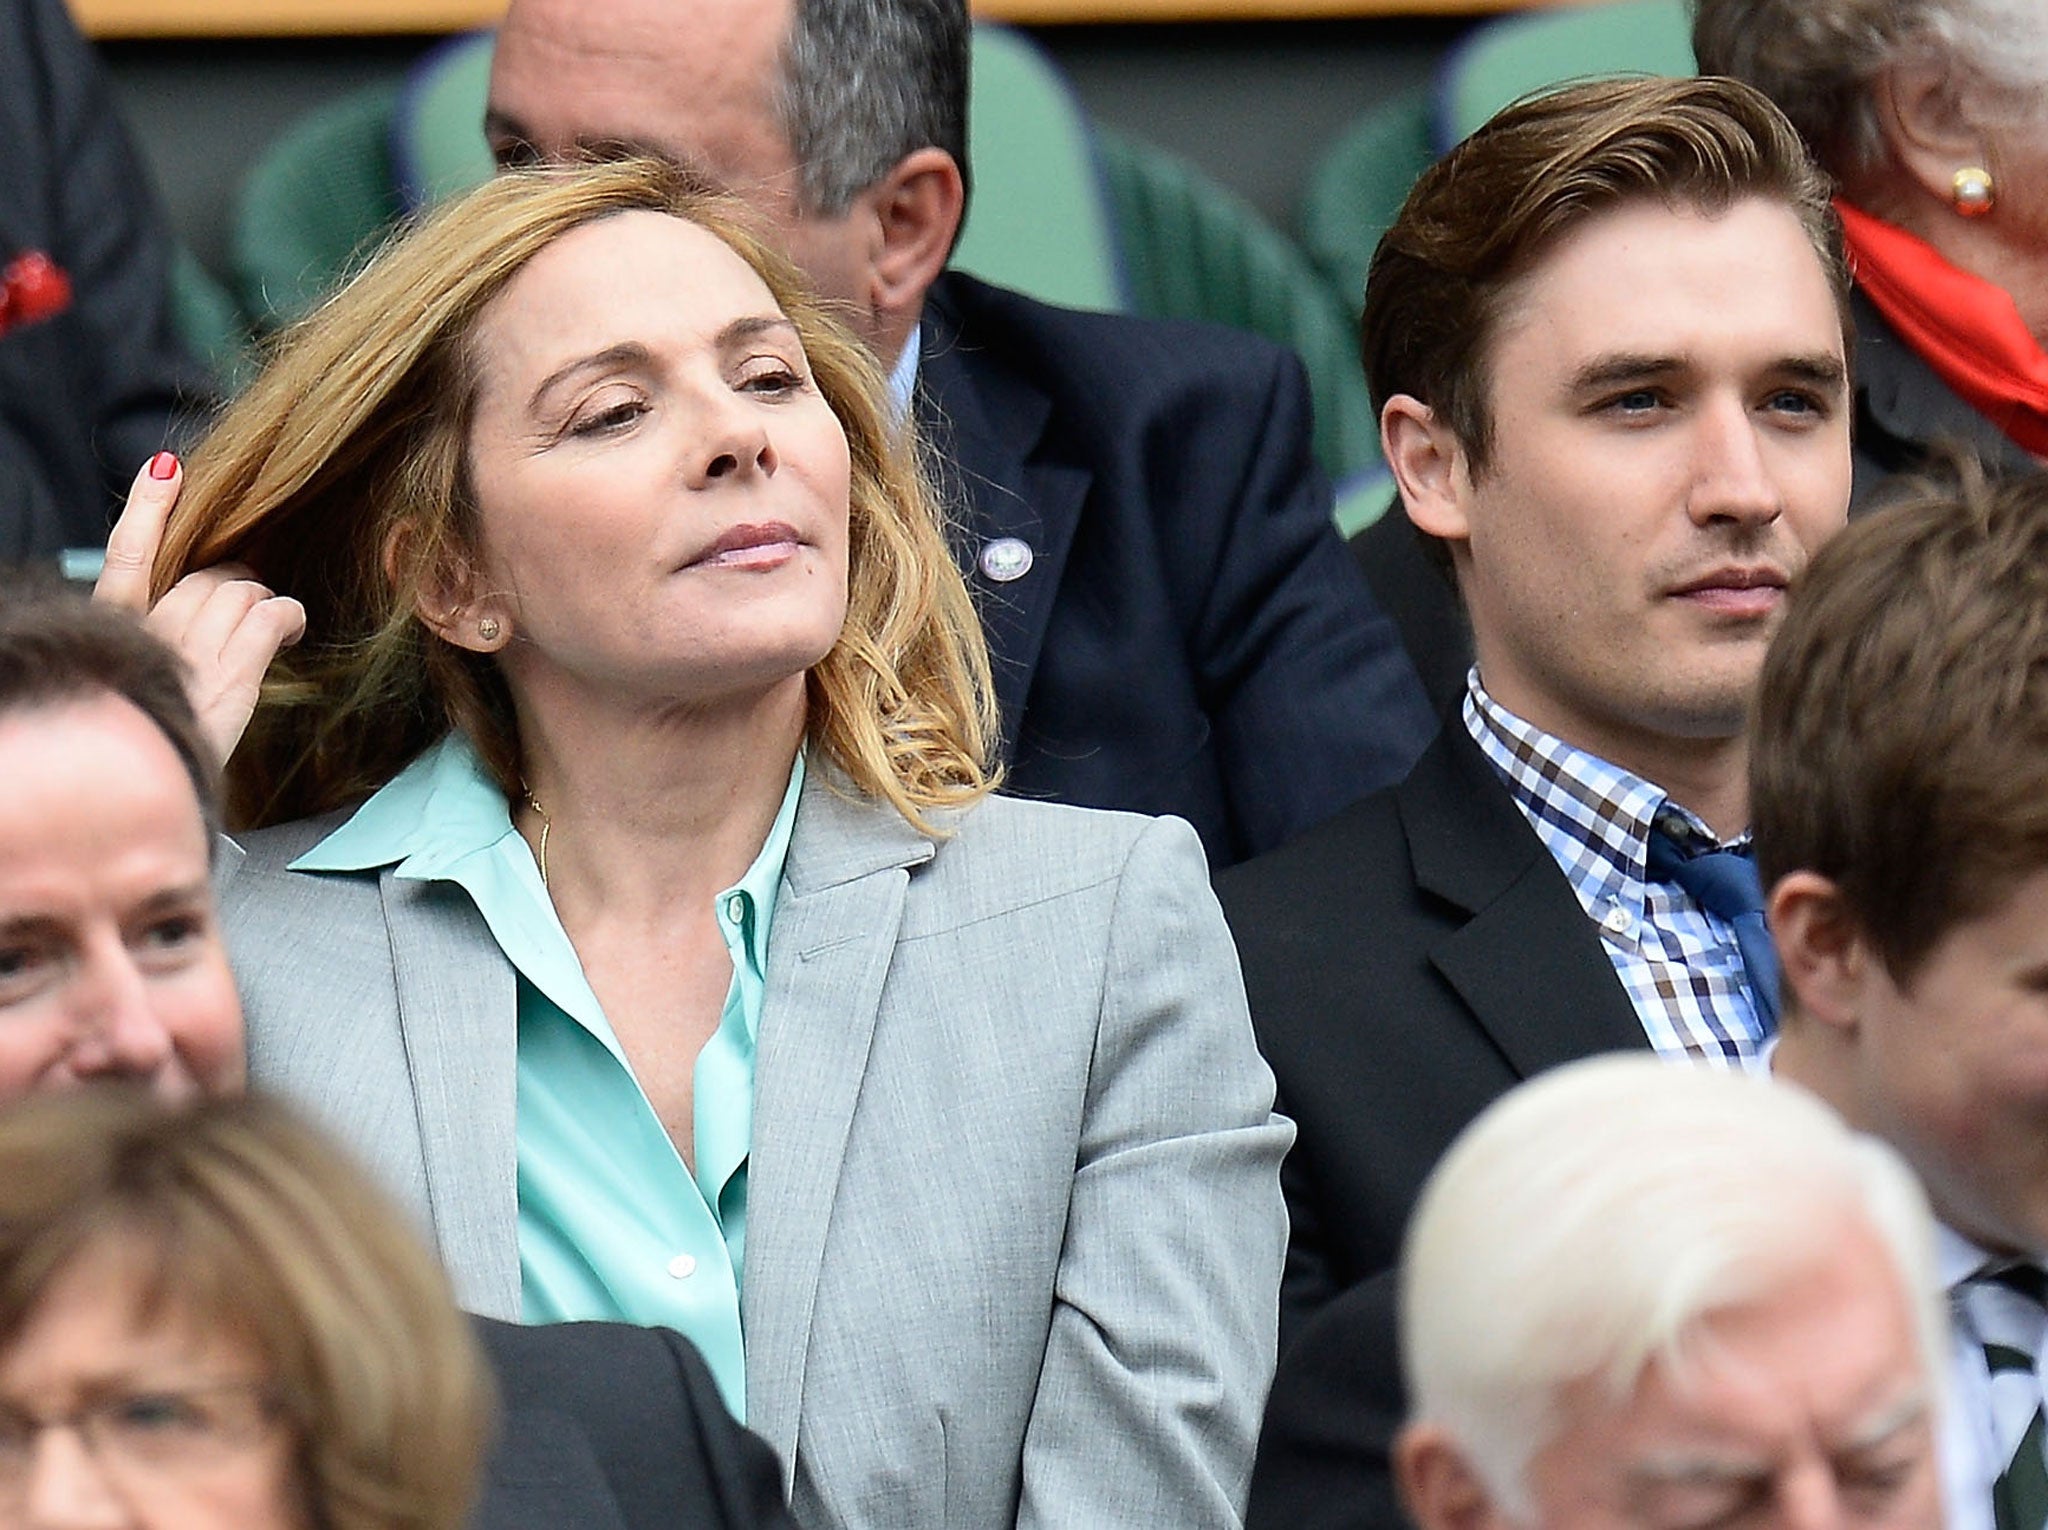 Kim Cattrall and Seth Numrich sit in the Royal Box before the Ladies' Singles quarter-final match between Agnieszka Radwanska of Poland and Na Li of China on day eight of the Wimbledon Lawn Tennis Championships at the All England Lawn Tennis and Croquet Club at Wimbledon on July 2, 2013 in London, England.